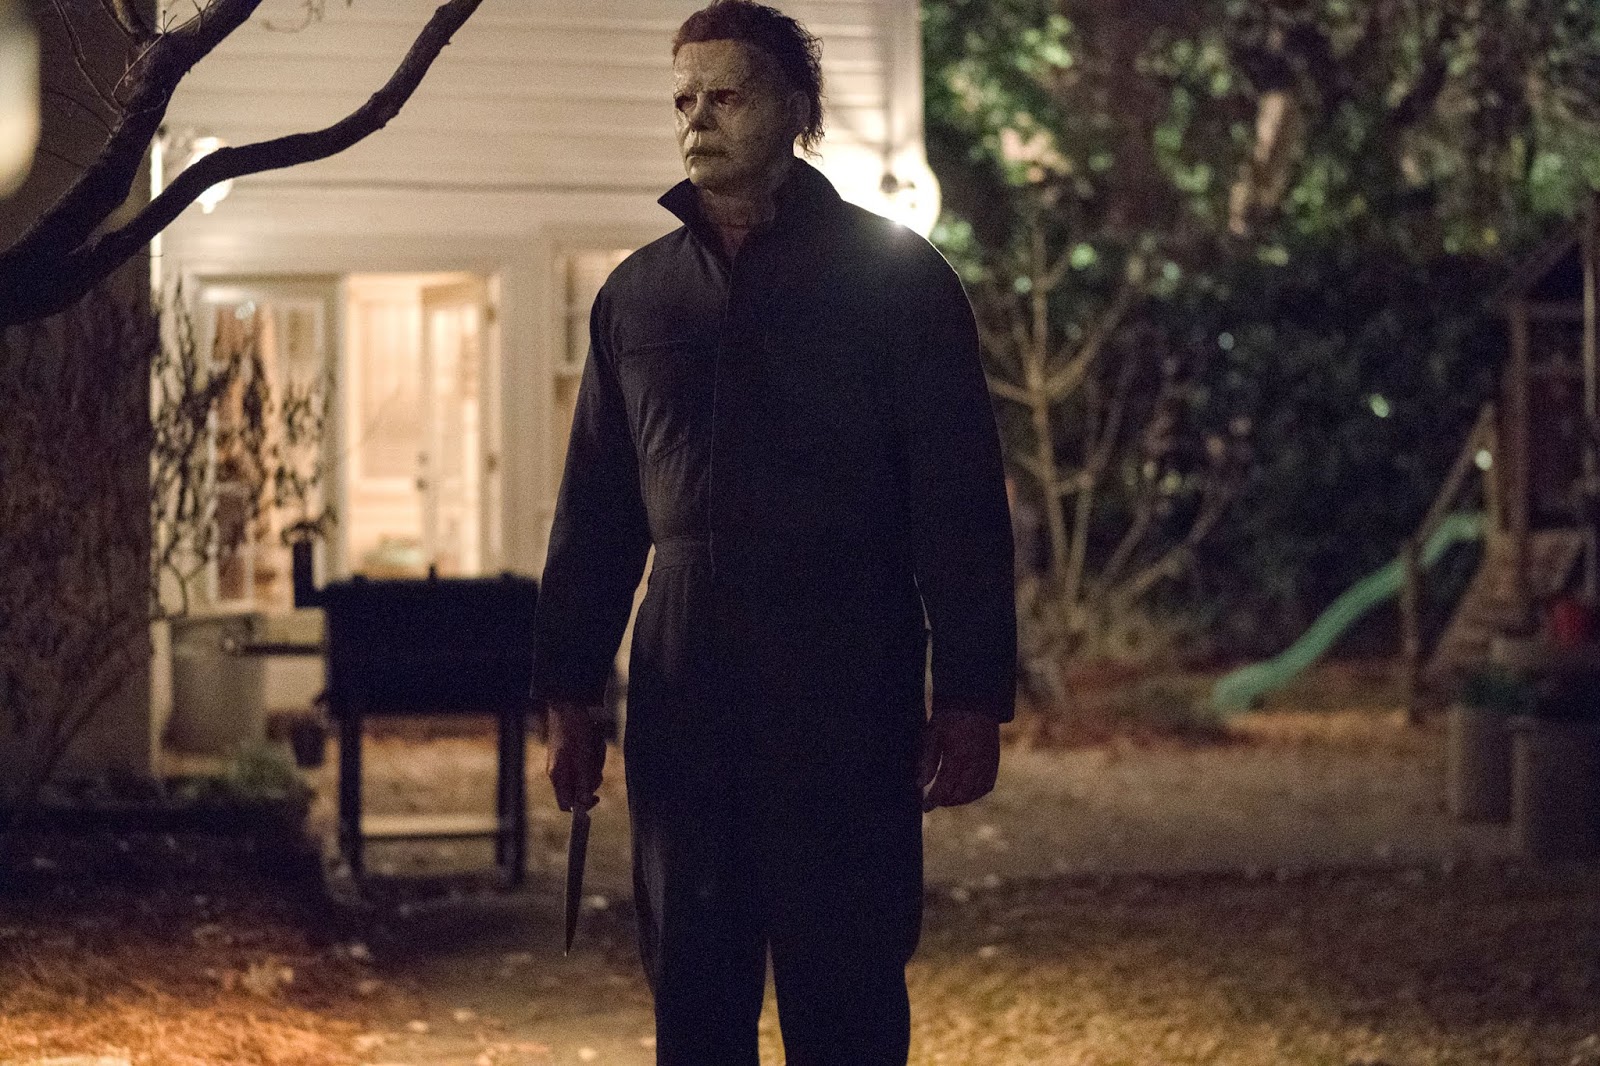 MOVIES: Halloween - Review